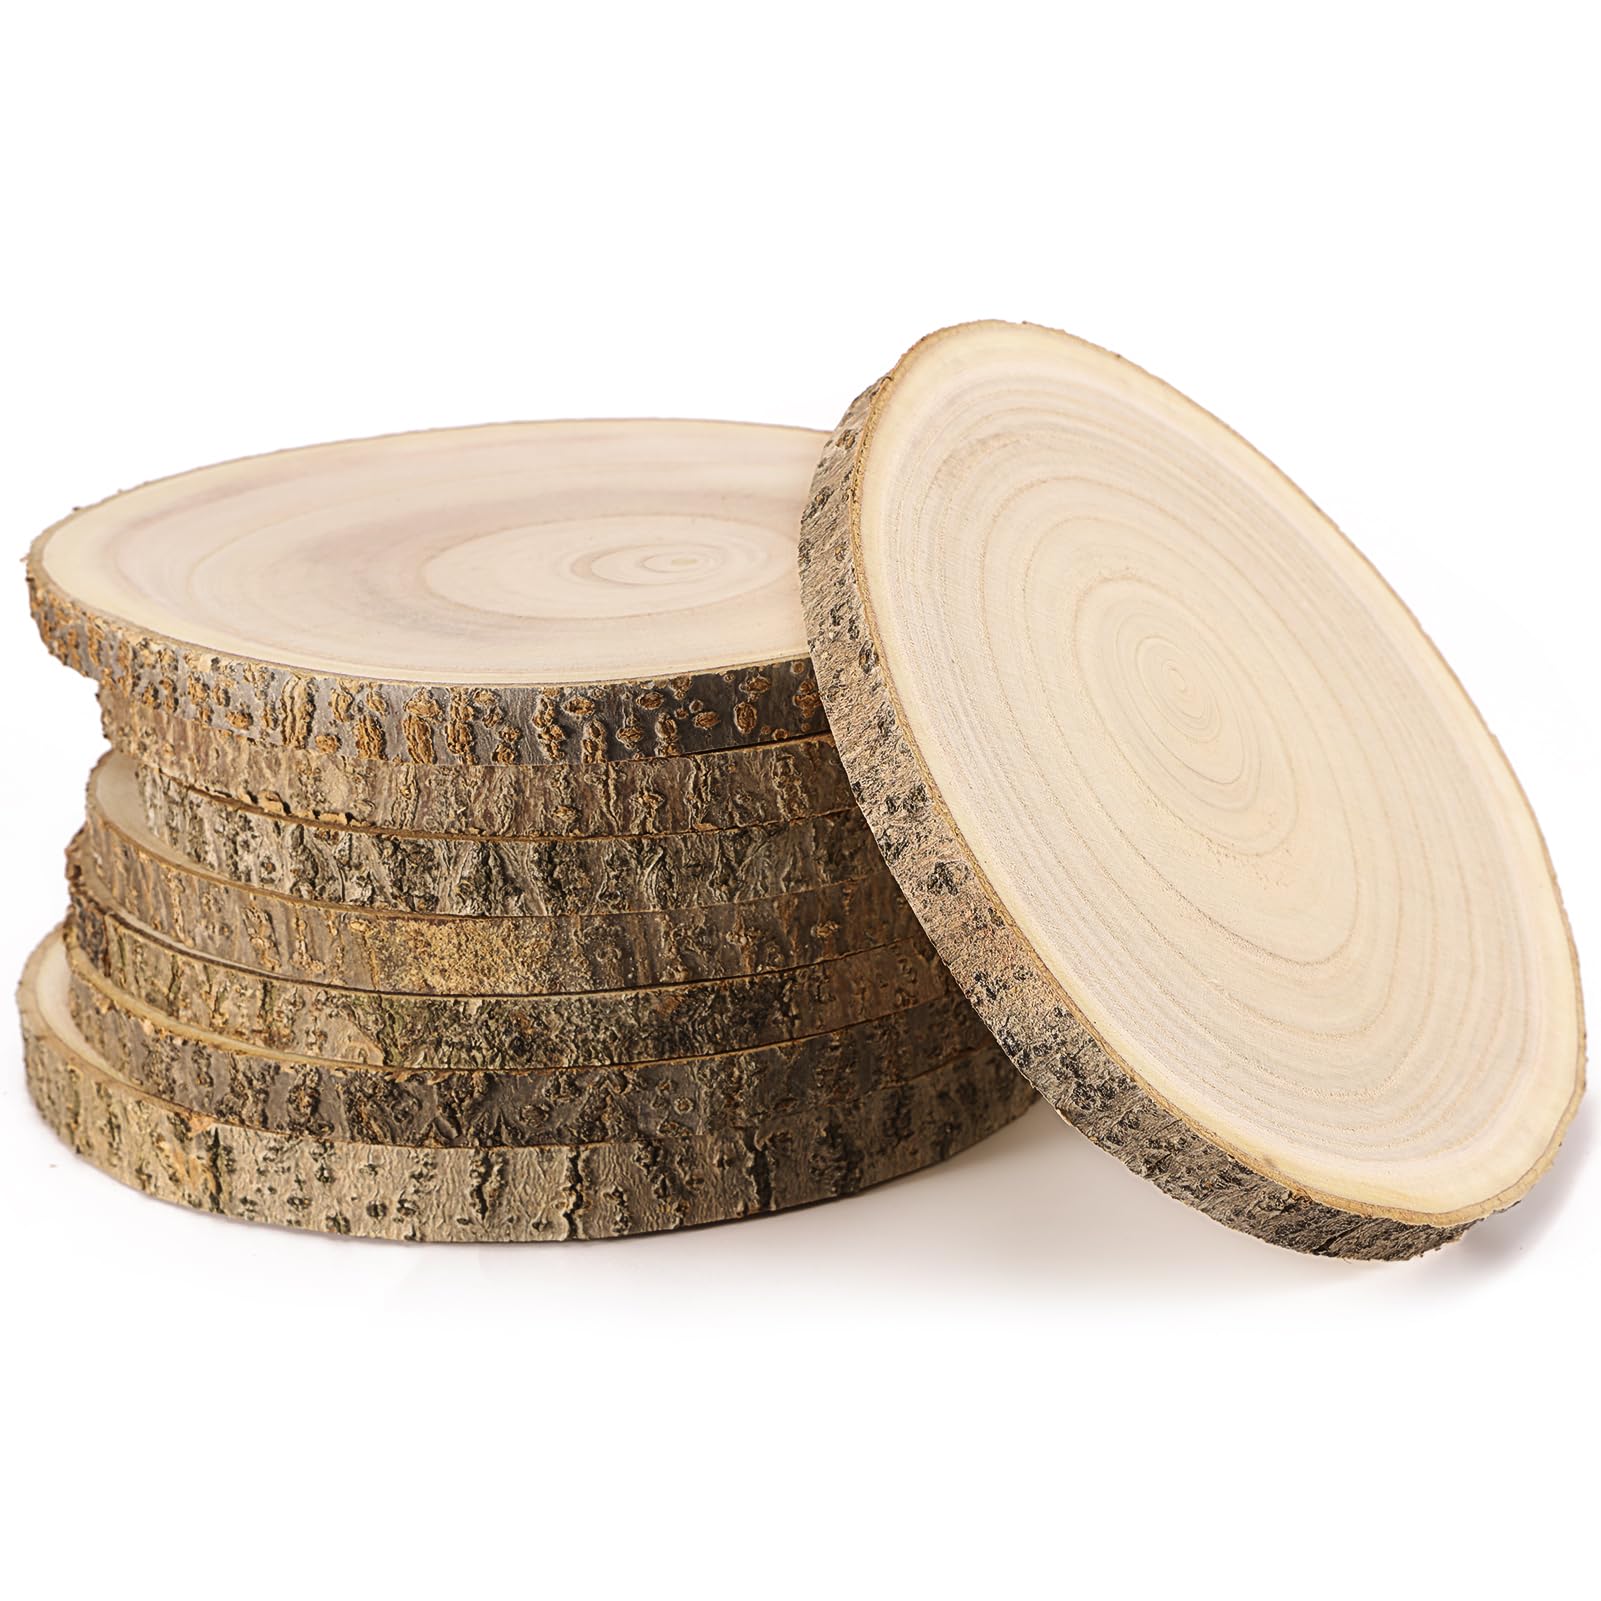  Pllieay 6 Pack 12-13 Inch Round Nature Wood Slice, Wood Cookies Wooden  Centerpieces for Tables, Weddings, Table Centerpieces and Other DIY Projects